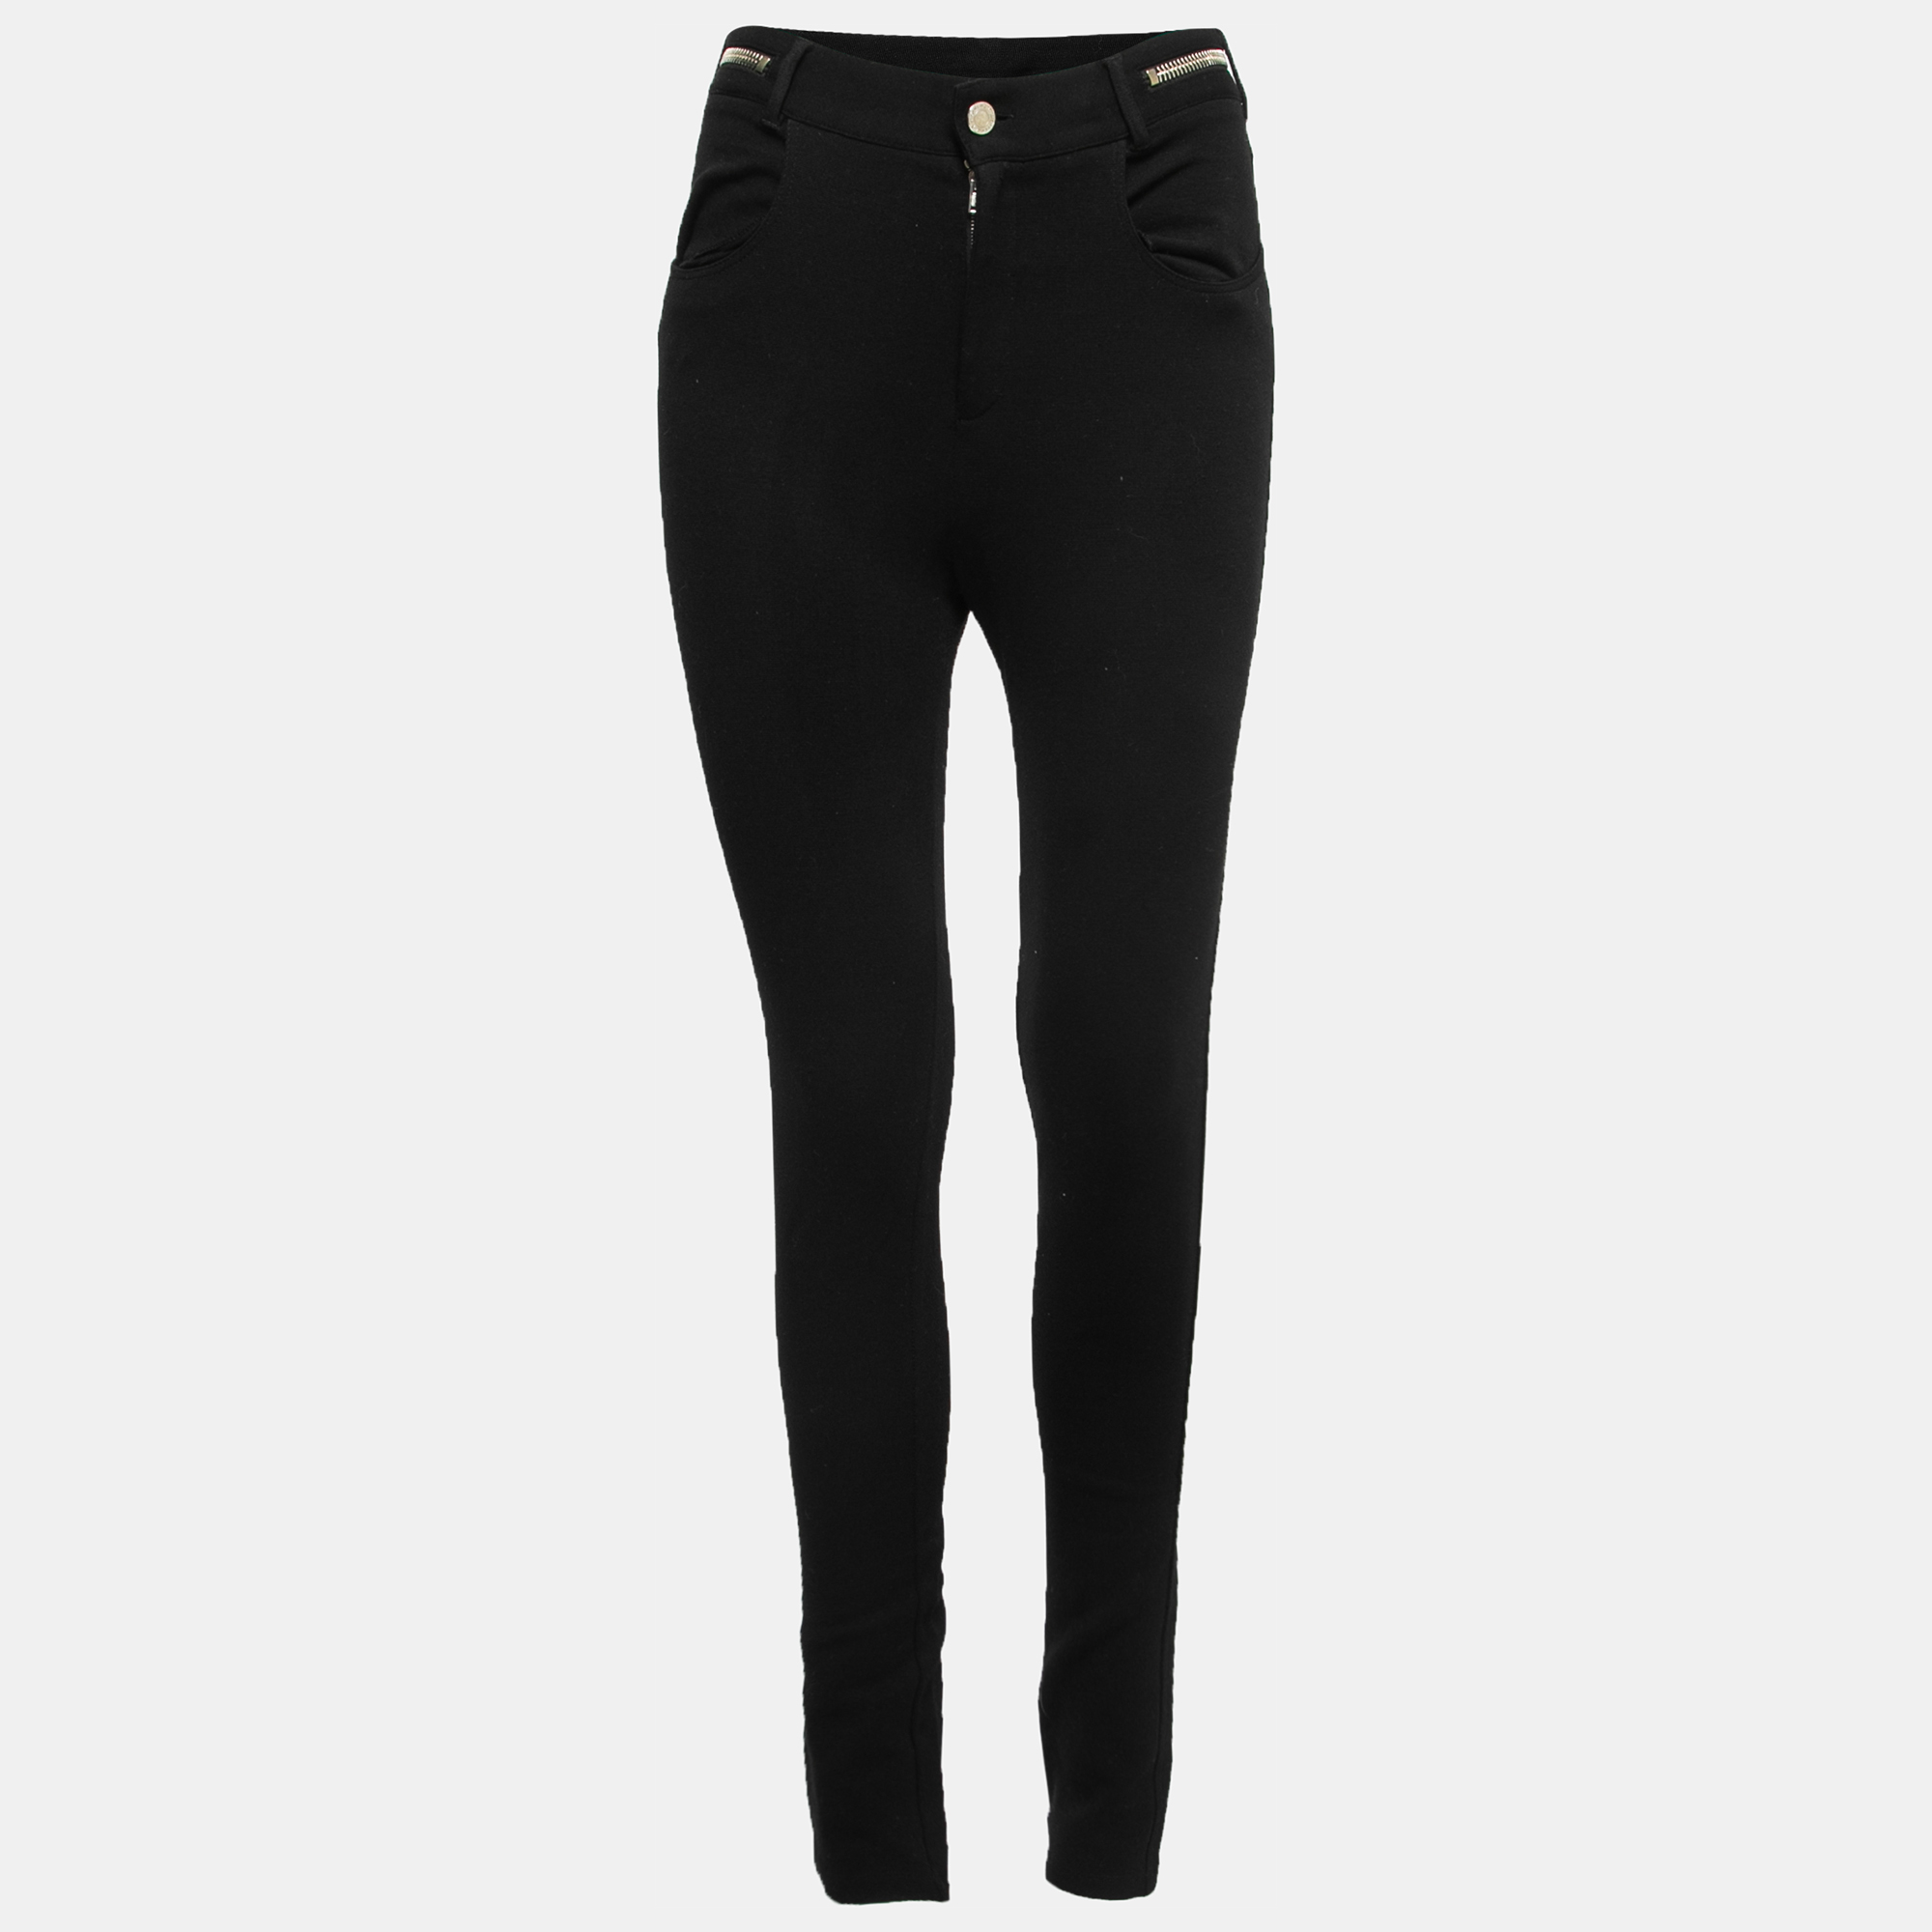 Pre-owned Givenchy Black Stretch Knit Zipper Detail Skinny Pants M